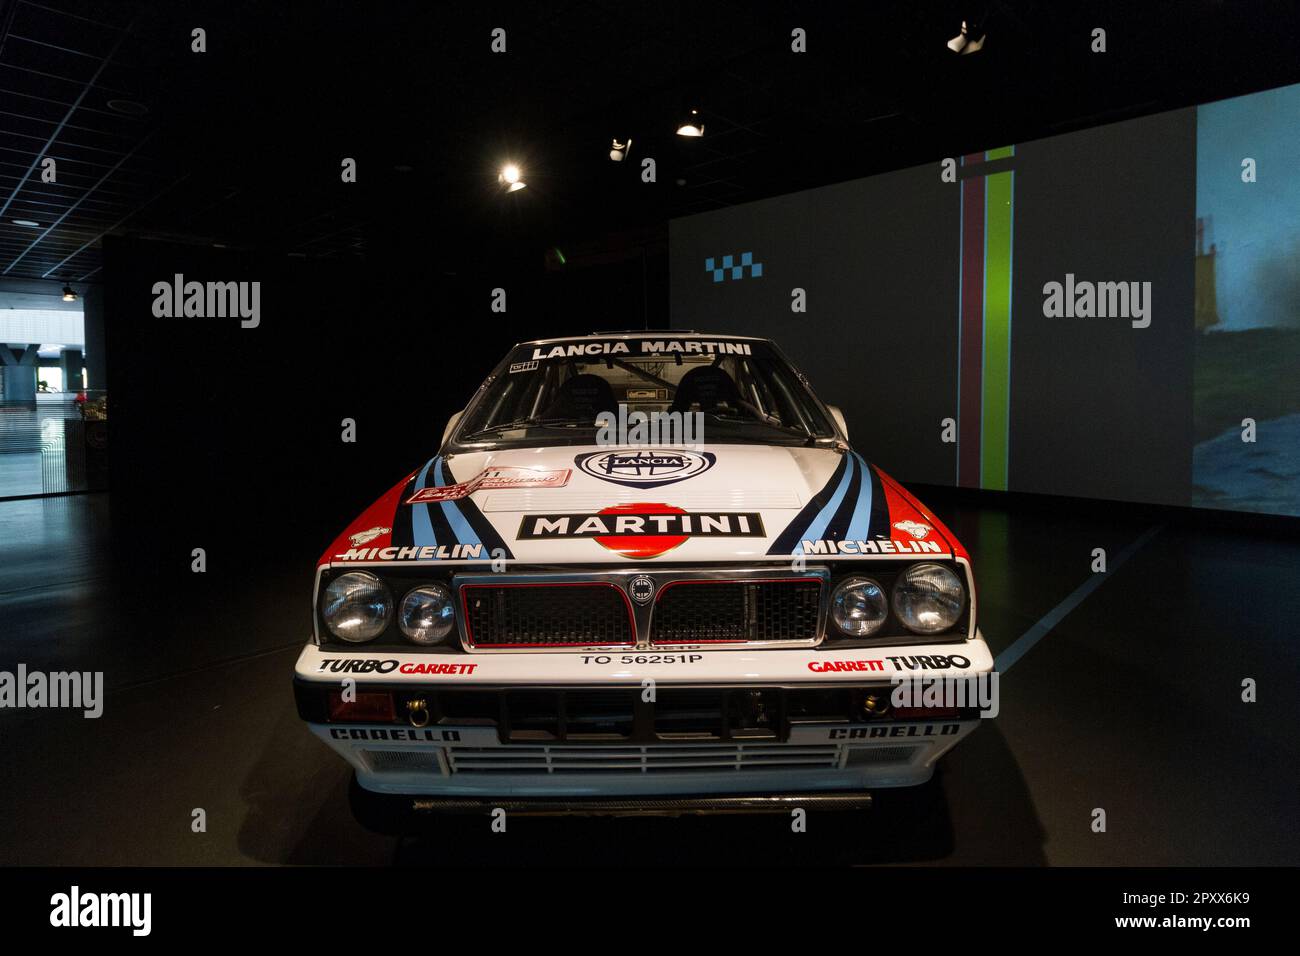 Lancia Delta HF integrale 16v (1990). Exhibition of old rally cars 'Golden age of Rally' at MAUTO, Museo dell'Automobile of Turin, Italy. Stock Photo